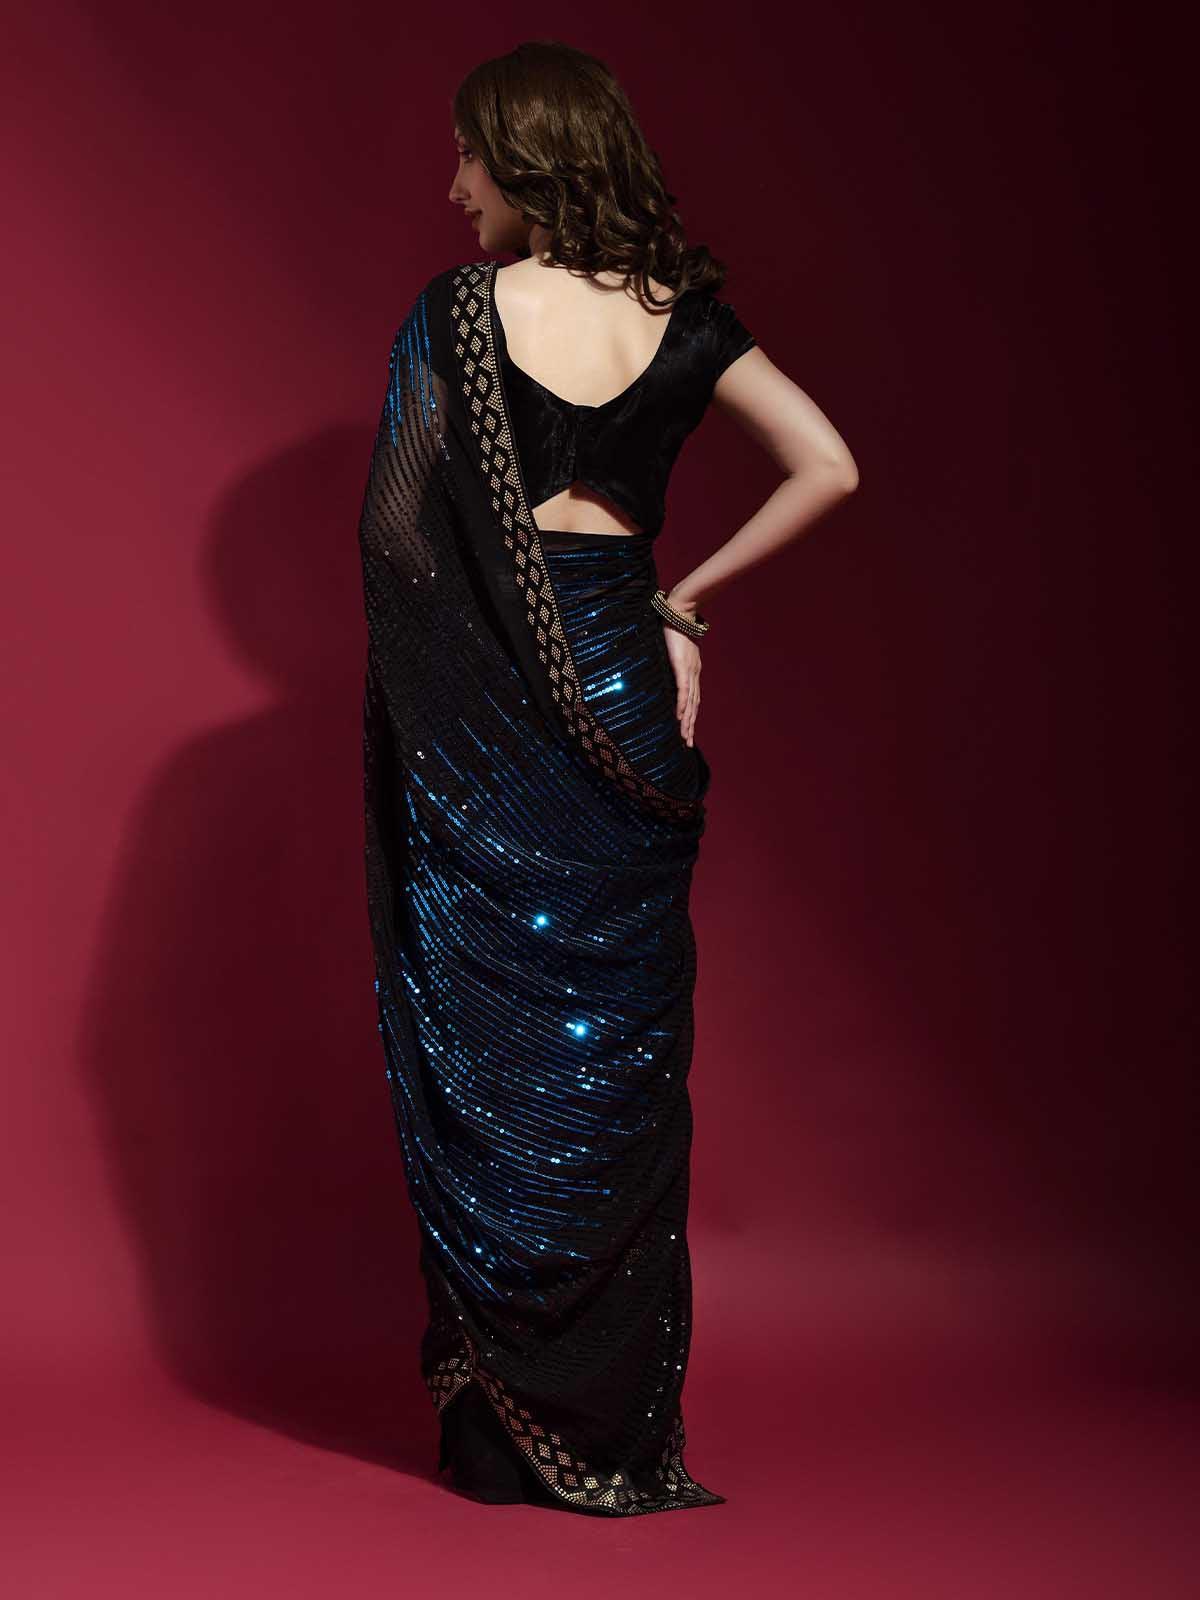 Women's Black And Blue Georgette Sequence Saree With Blouse - Odette